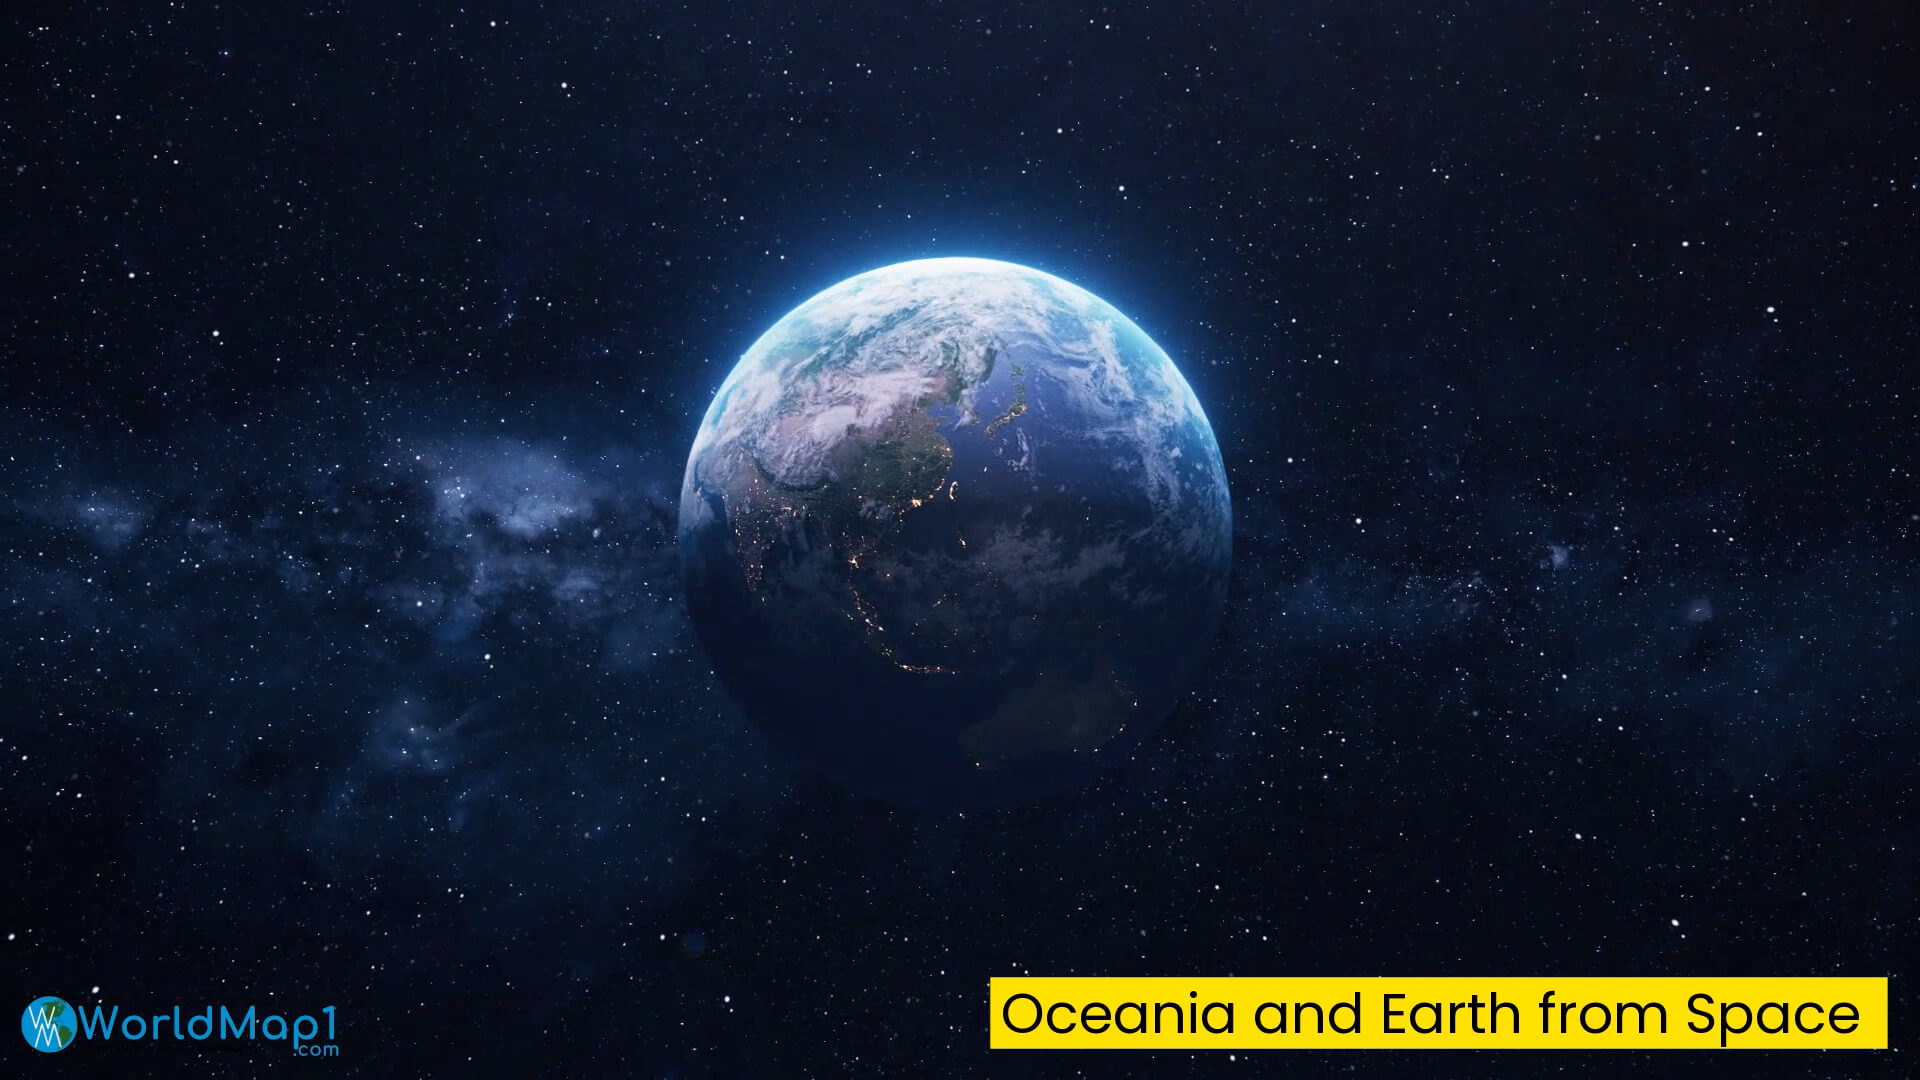 Oceania and Earth from Space